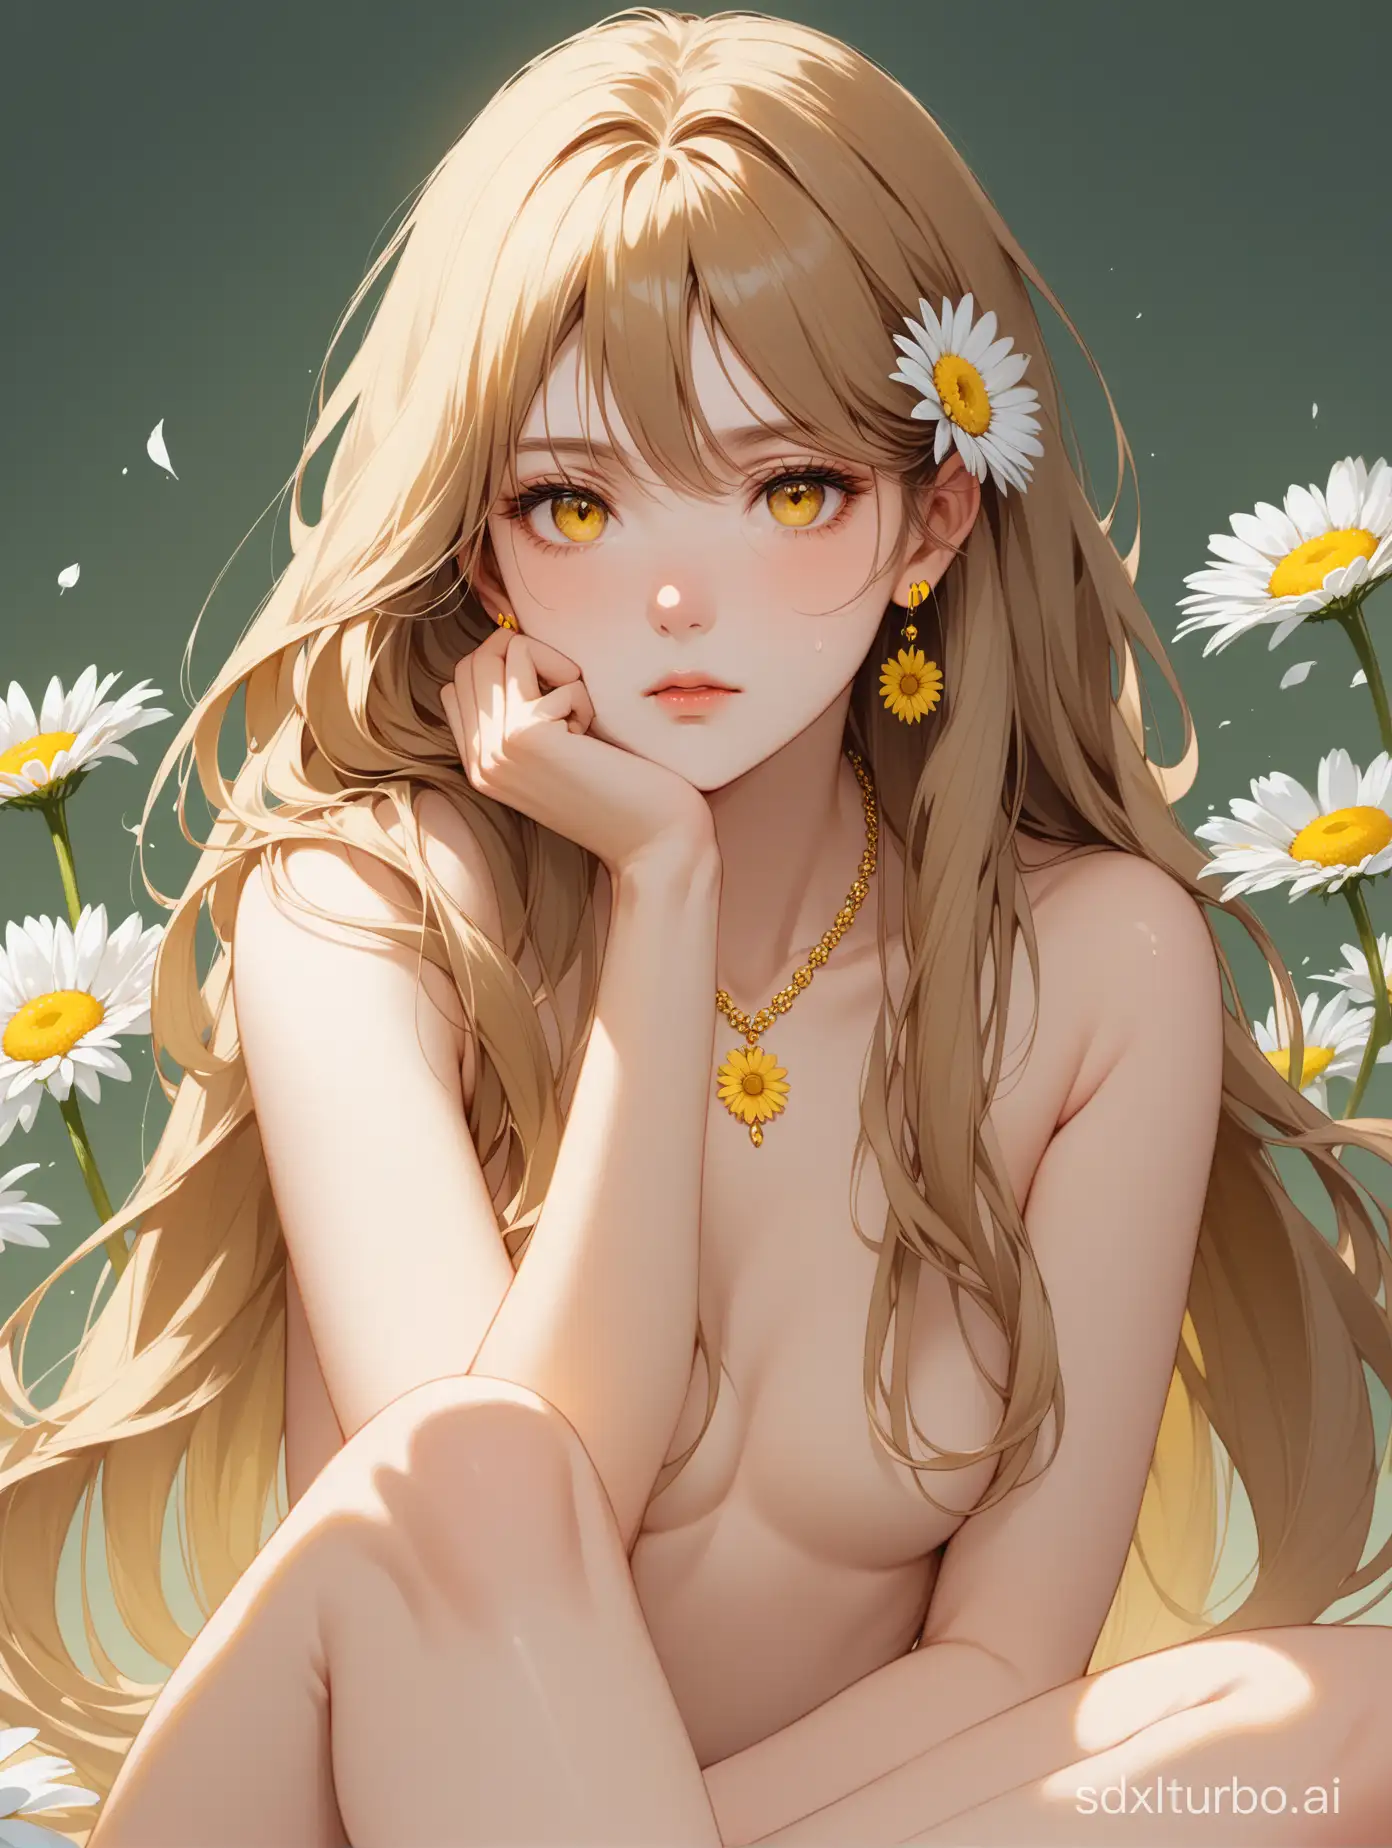 Solo-Portrait-of-a-Girl-with-Exquisite-Yellow-Eyes-and-Daisies